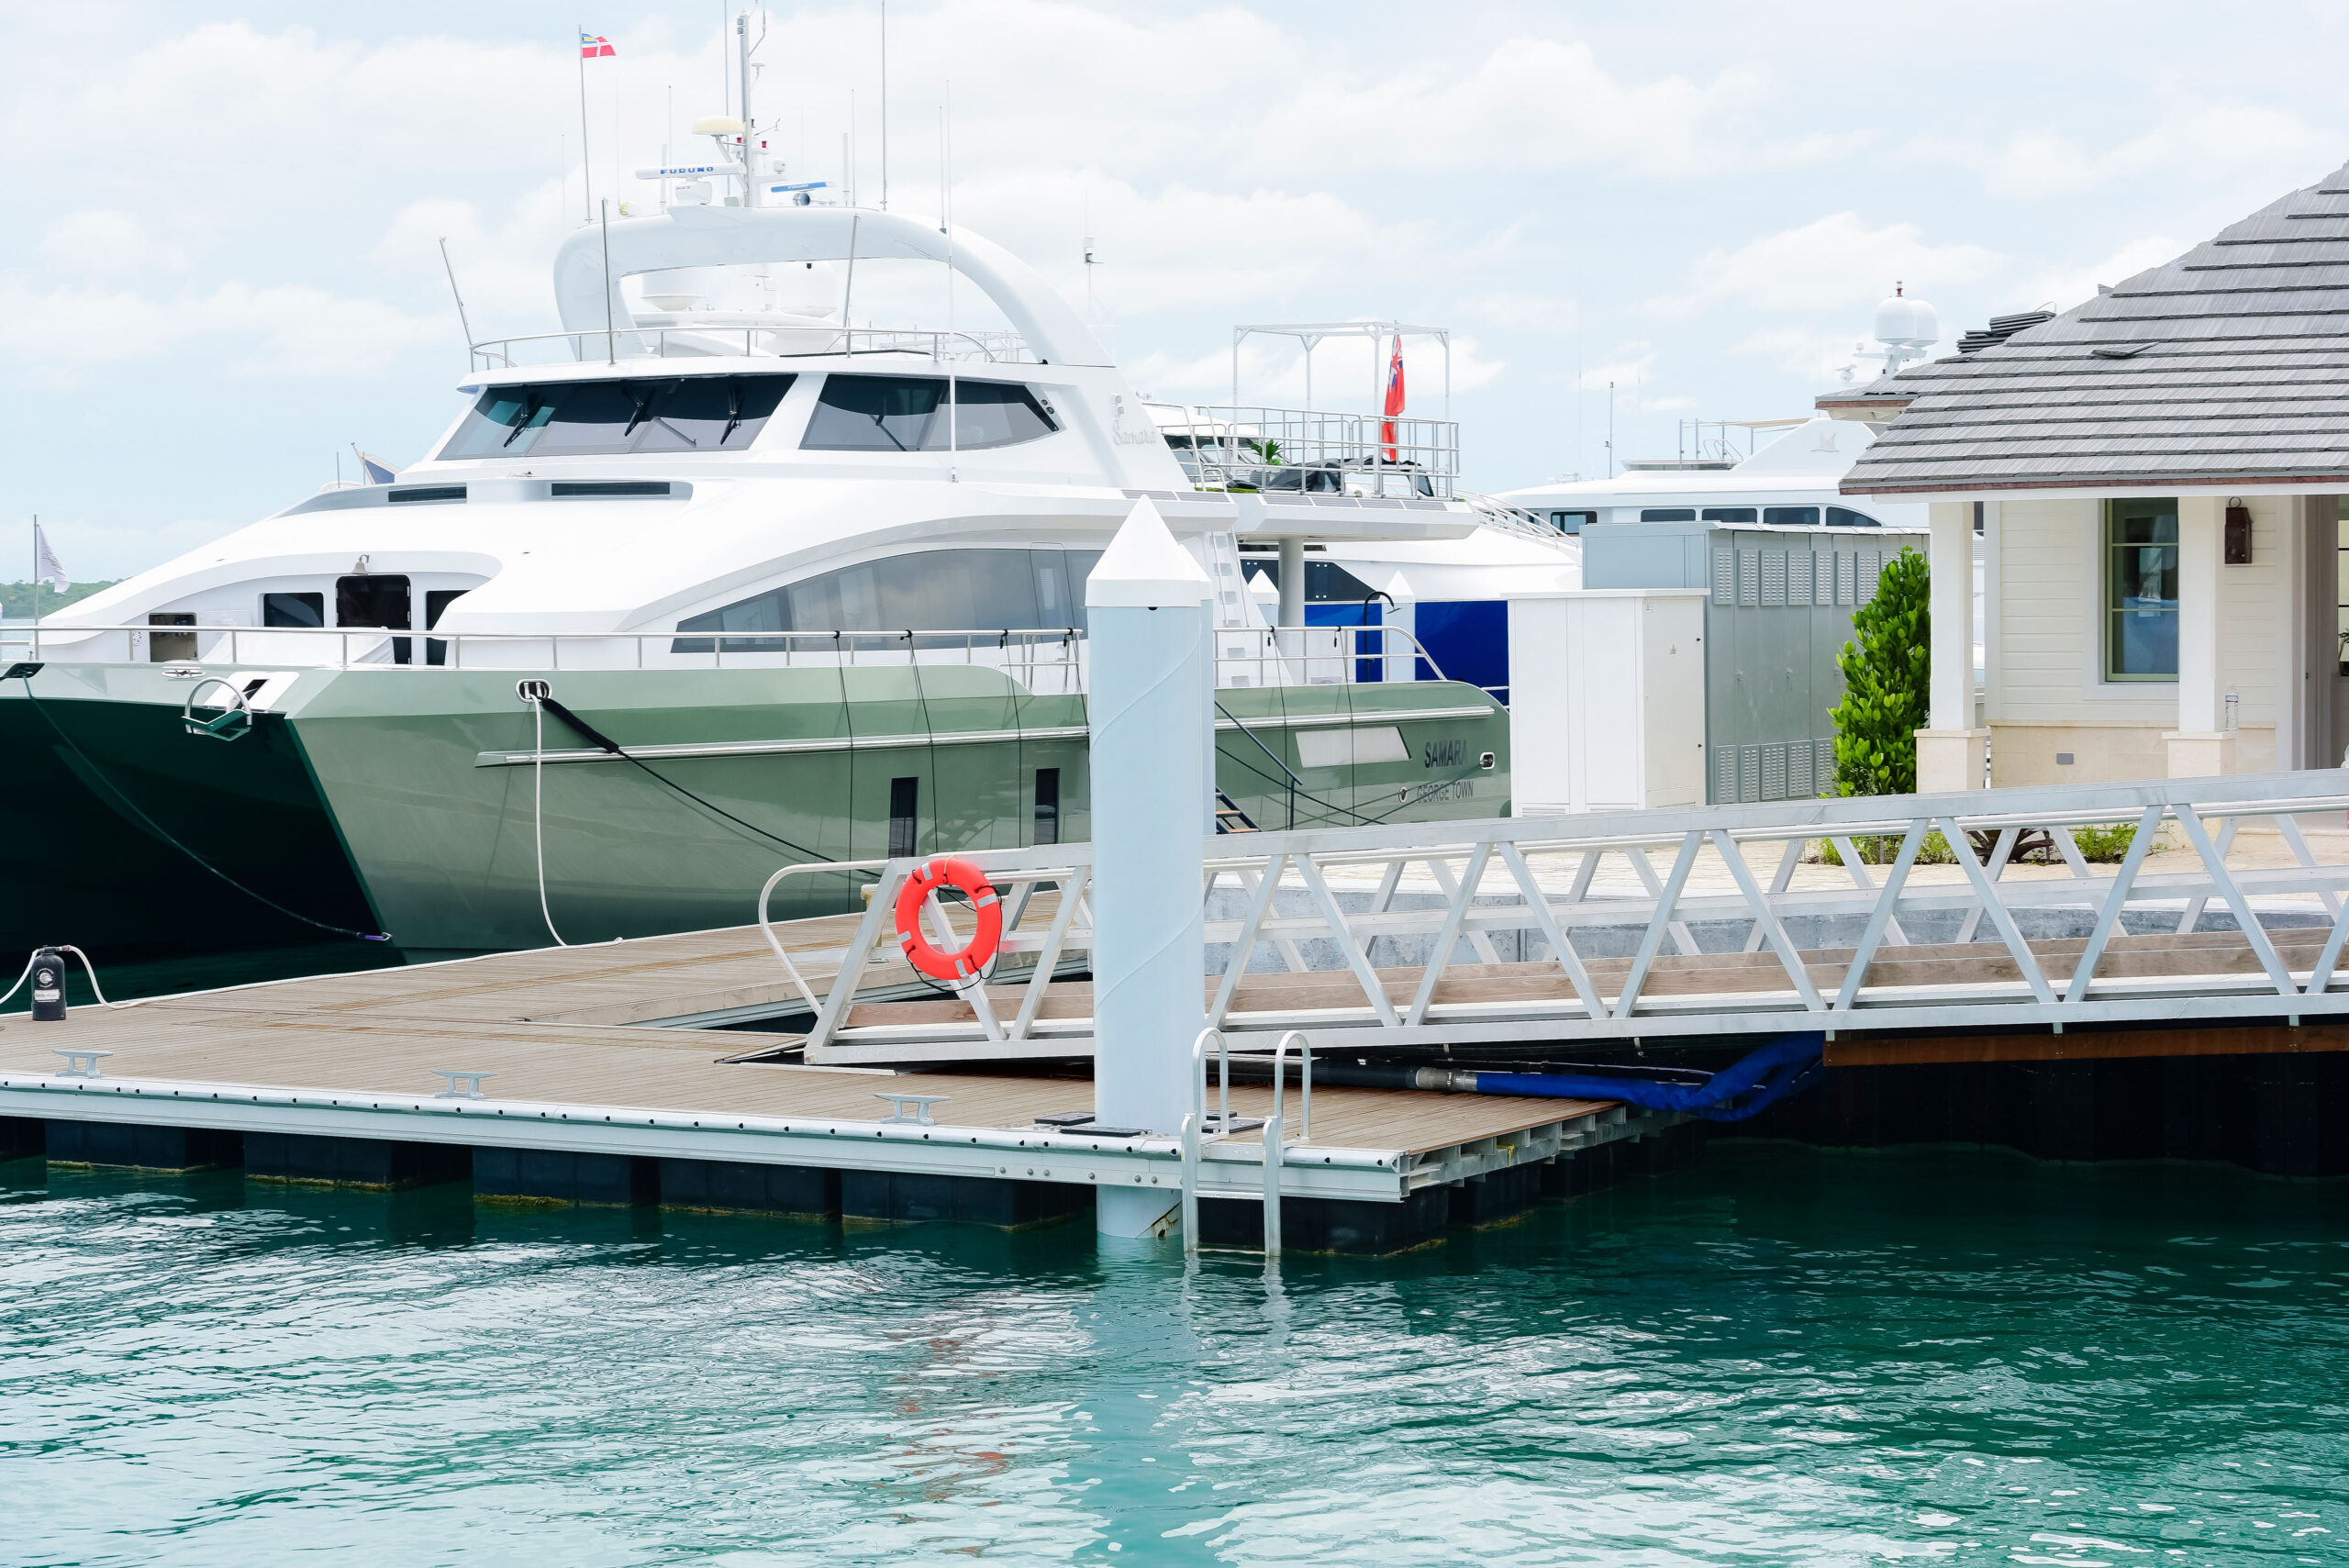 Custom aluminum gangway in the Bahamas leading to dock where yacht is moored